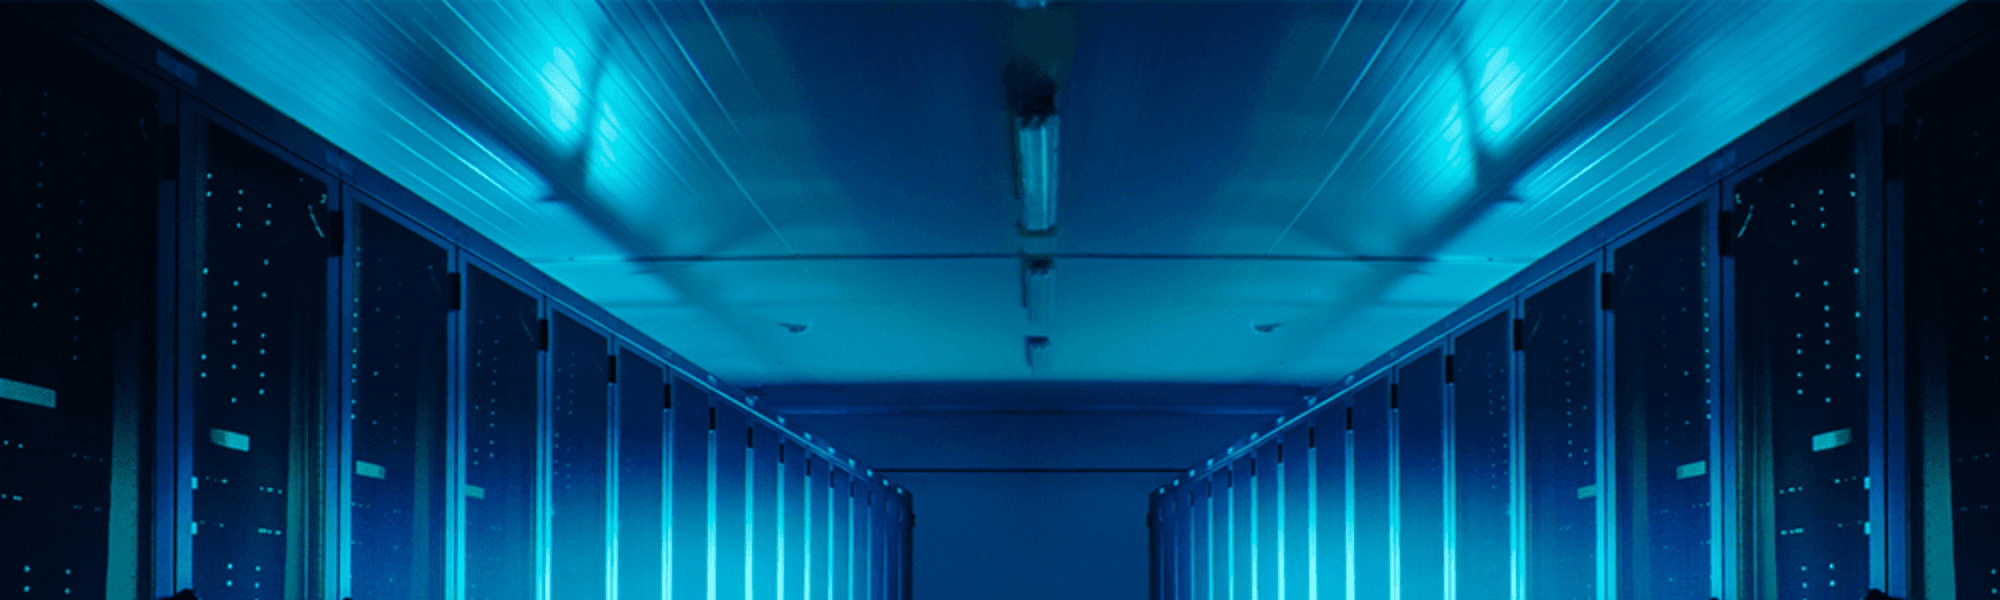 A dimly lit futuristic data center with rows of server racks casting blue lights, emblematic of high-tech and cybersecurity.